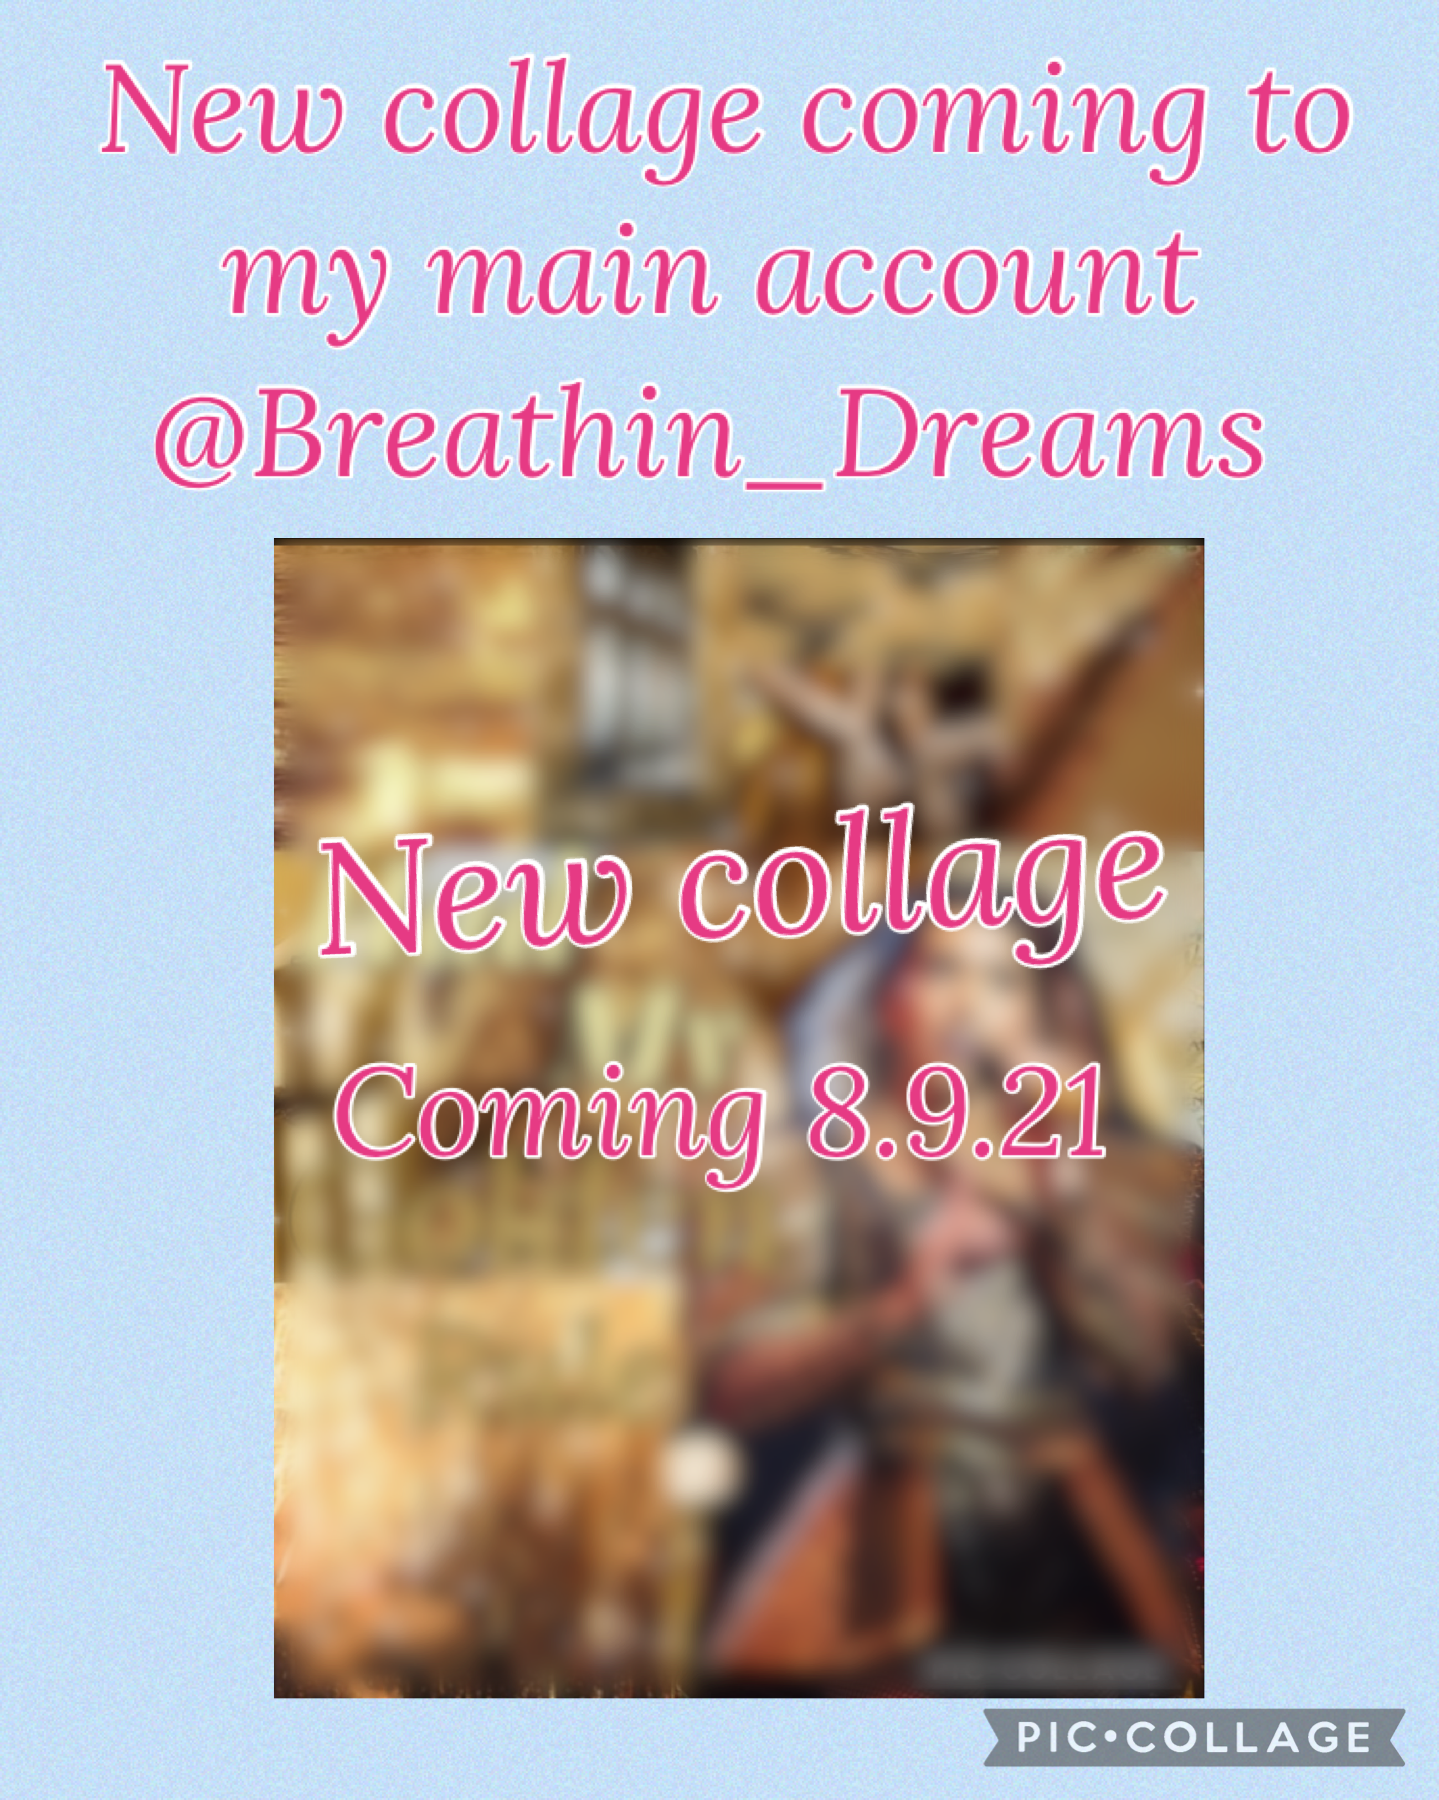 New collage coming on my main account @Breathin_Dreams 7.9.21